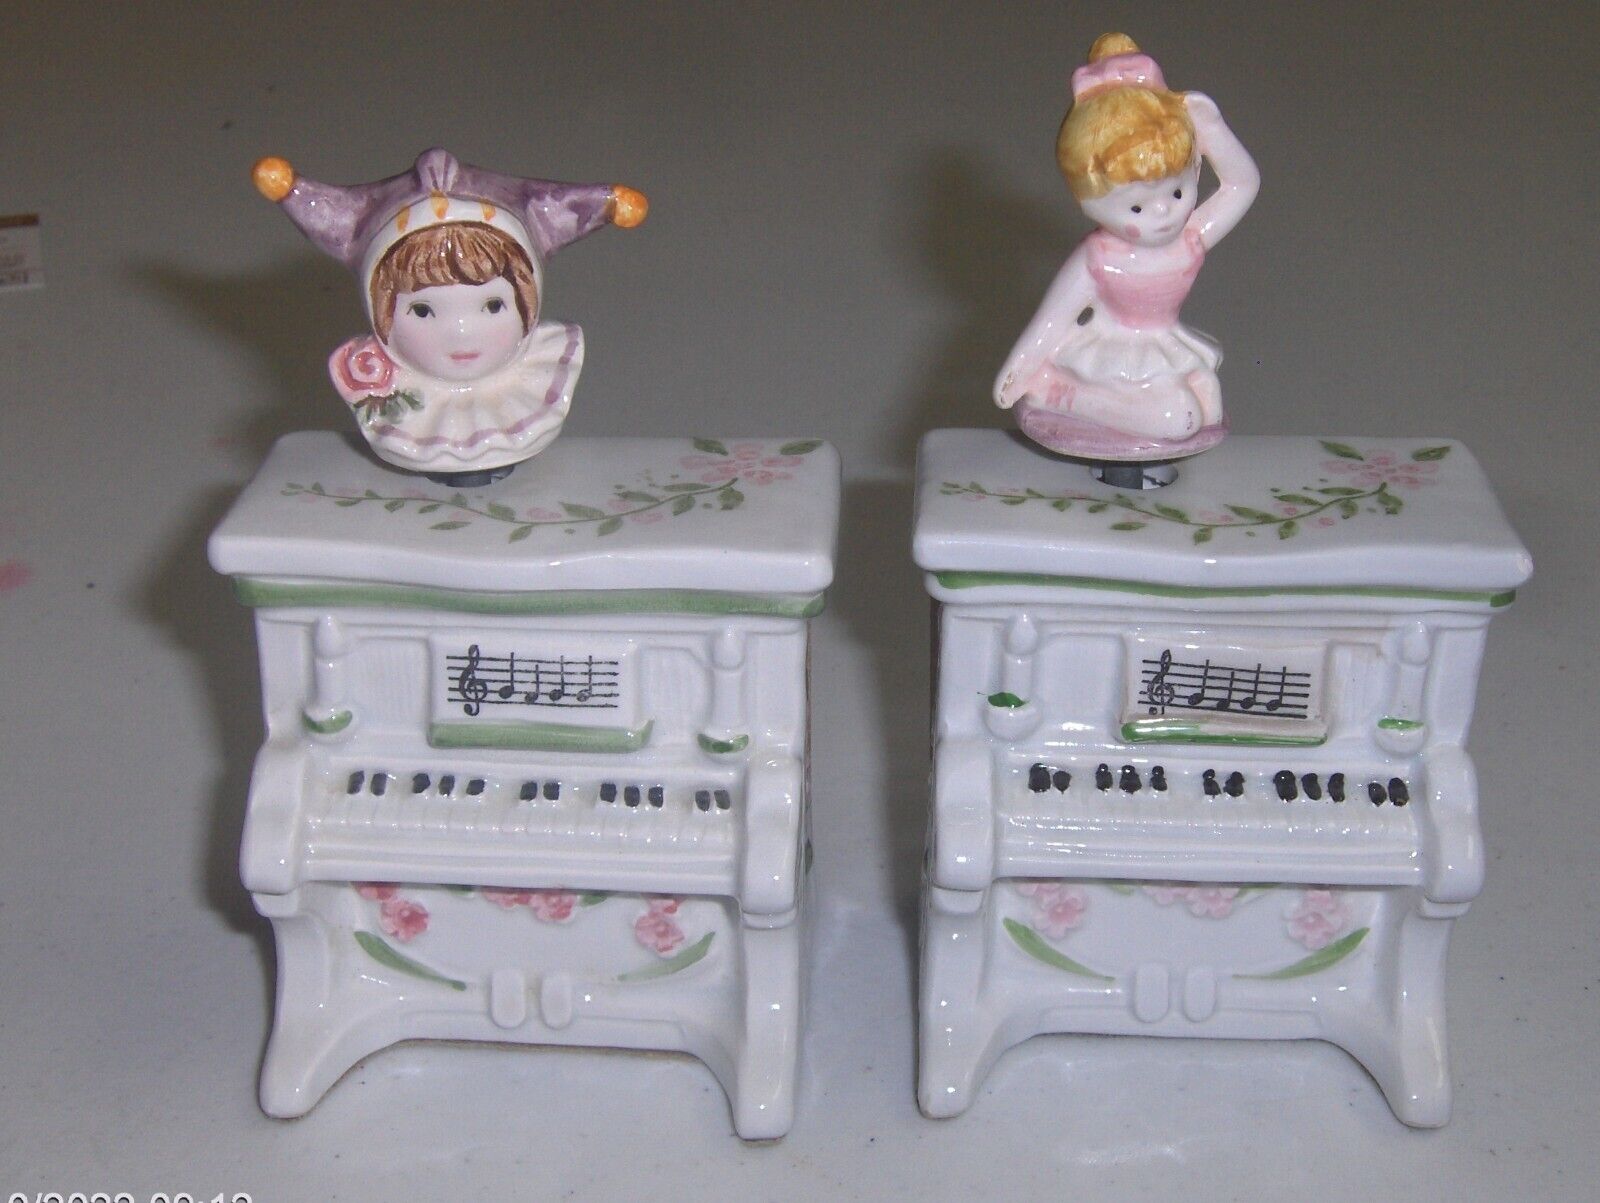 SCHMID MUSIC BOXES - 2 SMALL PIANOS - 1 WITH JESTER   1 WITH BALLERINA BOTH WORK